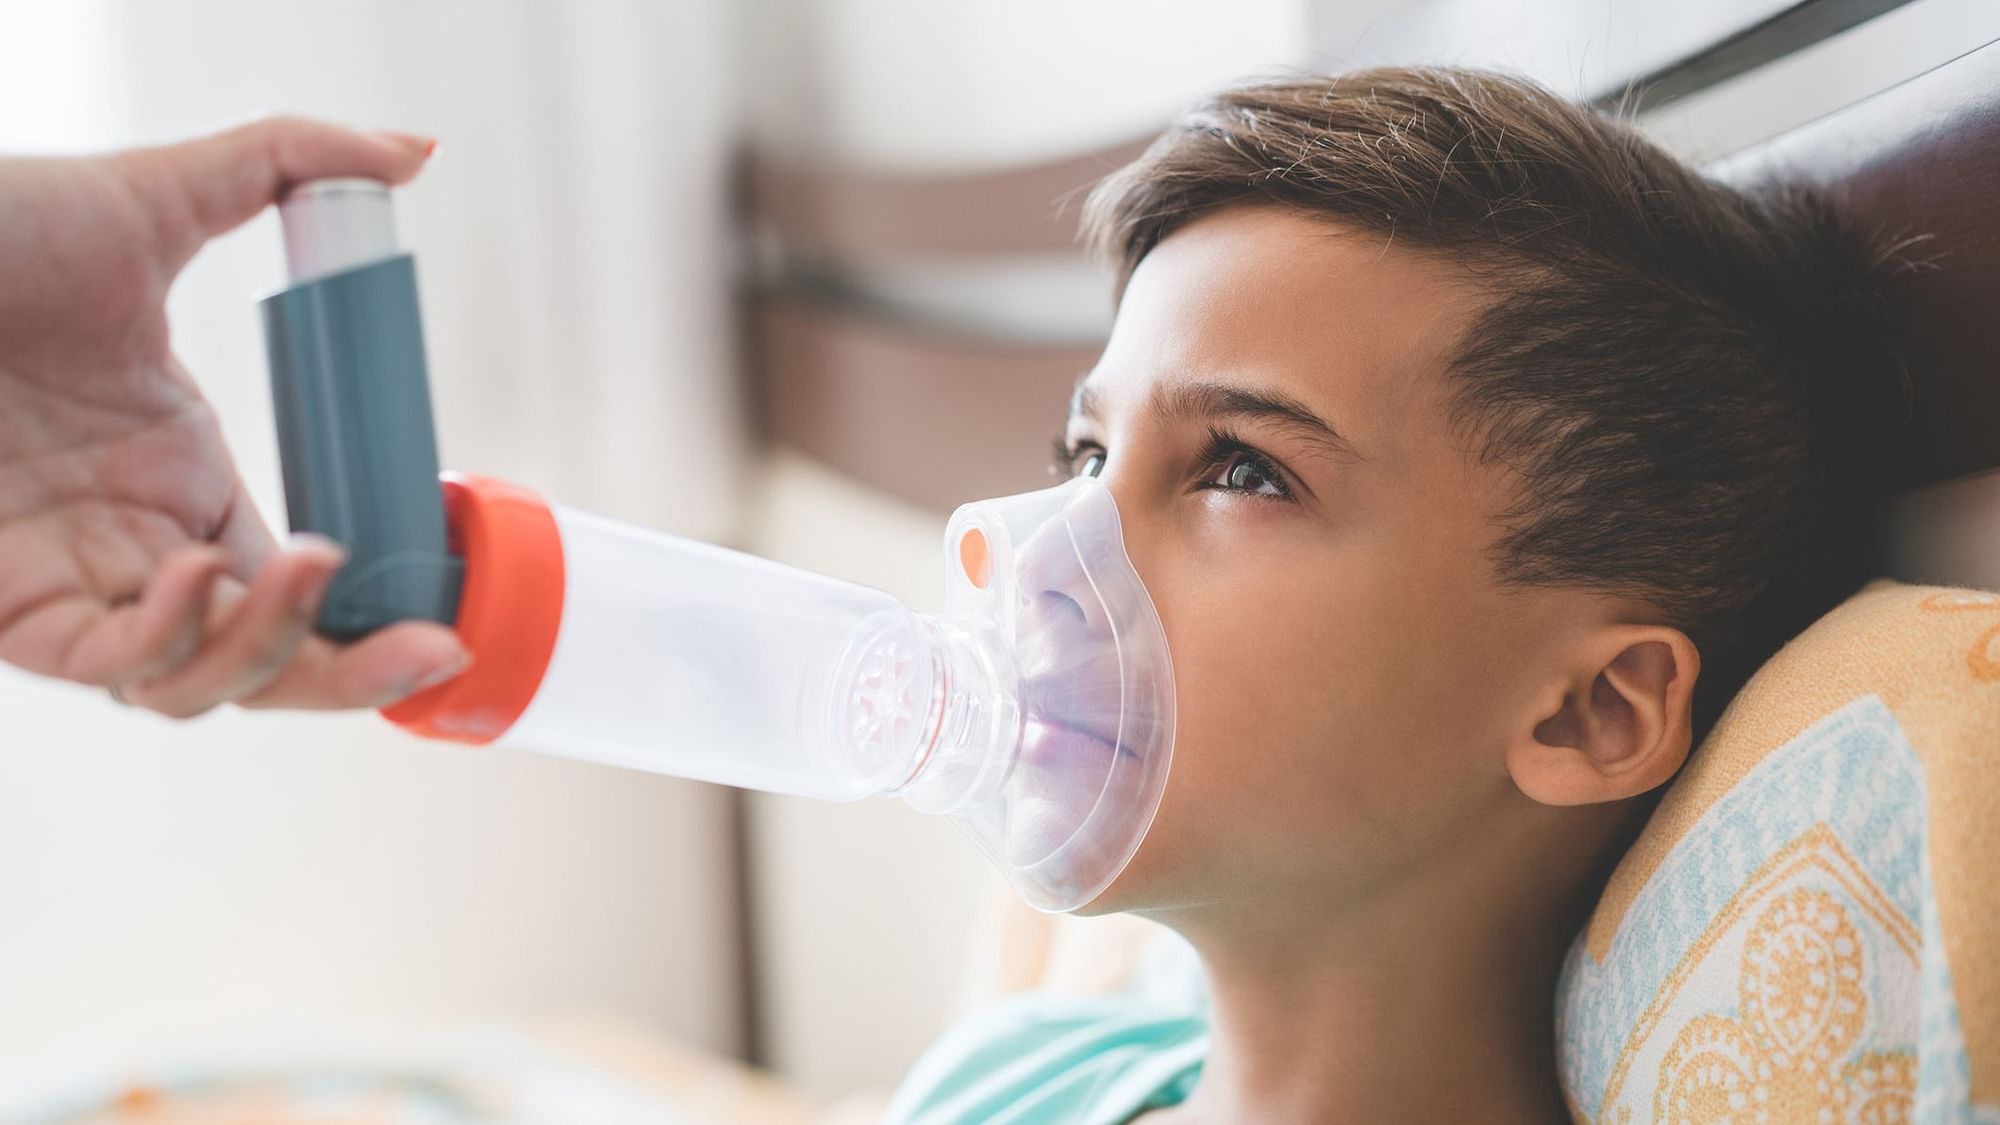 Vehicle Emissions Linked to 2 Million Child Asthma Cases Every Year